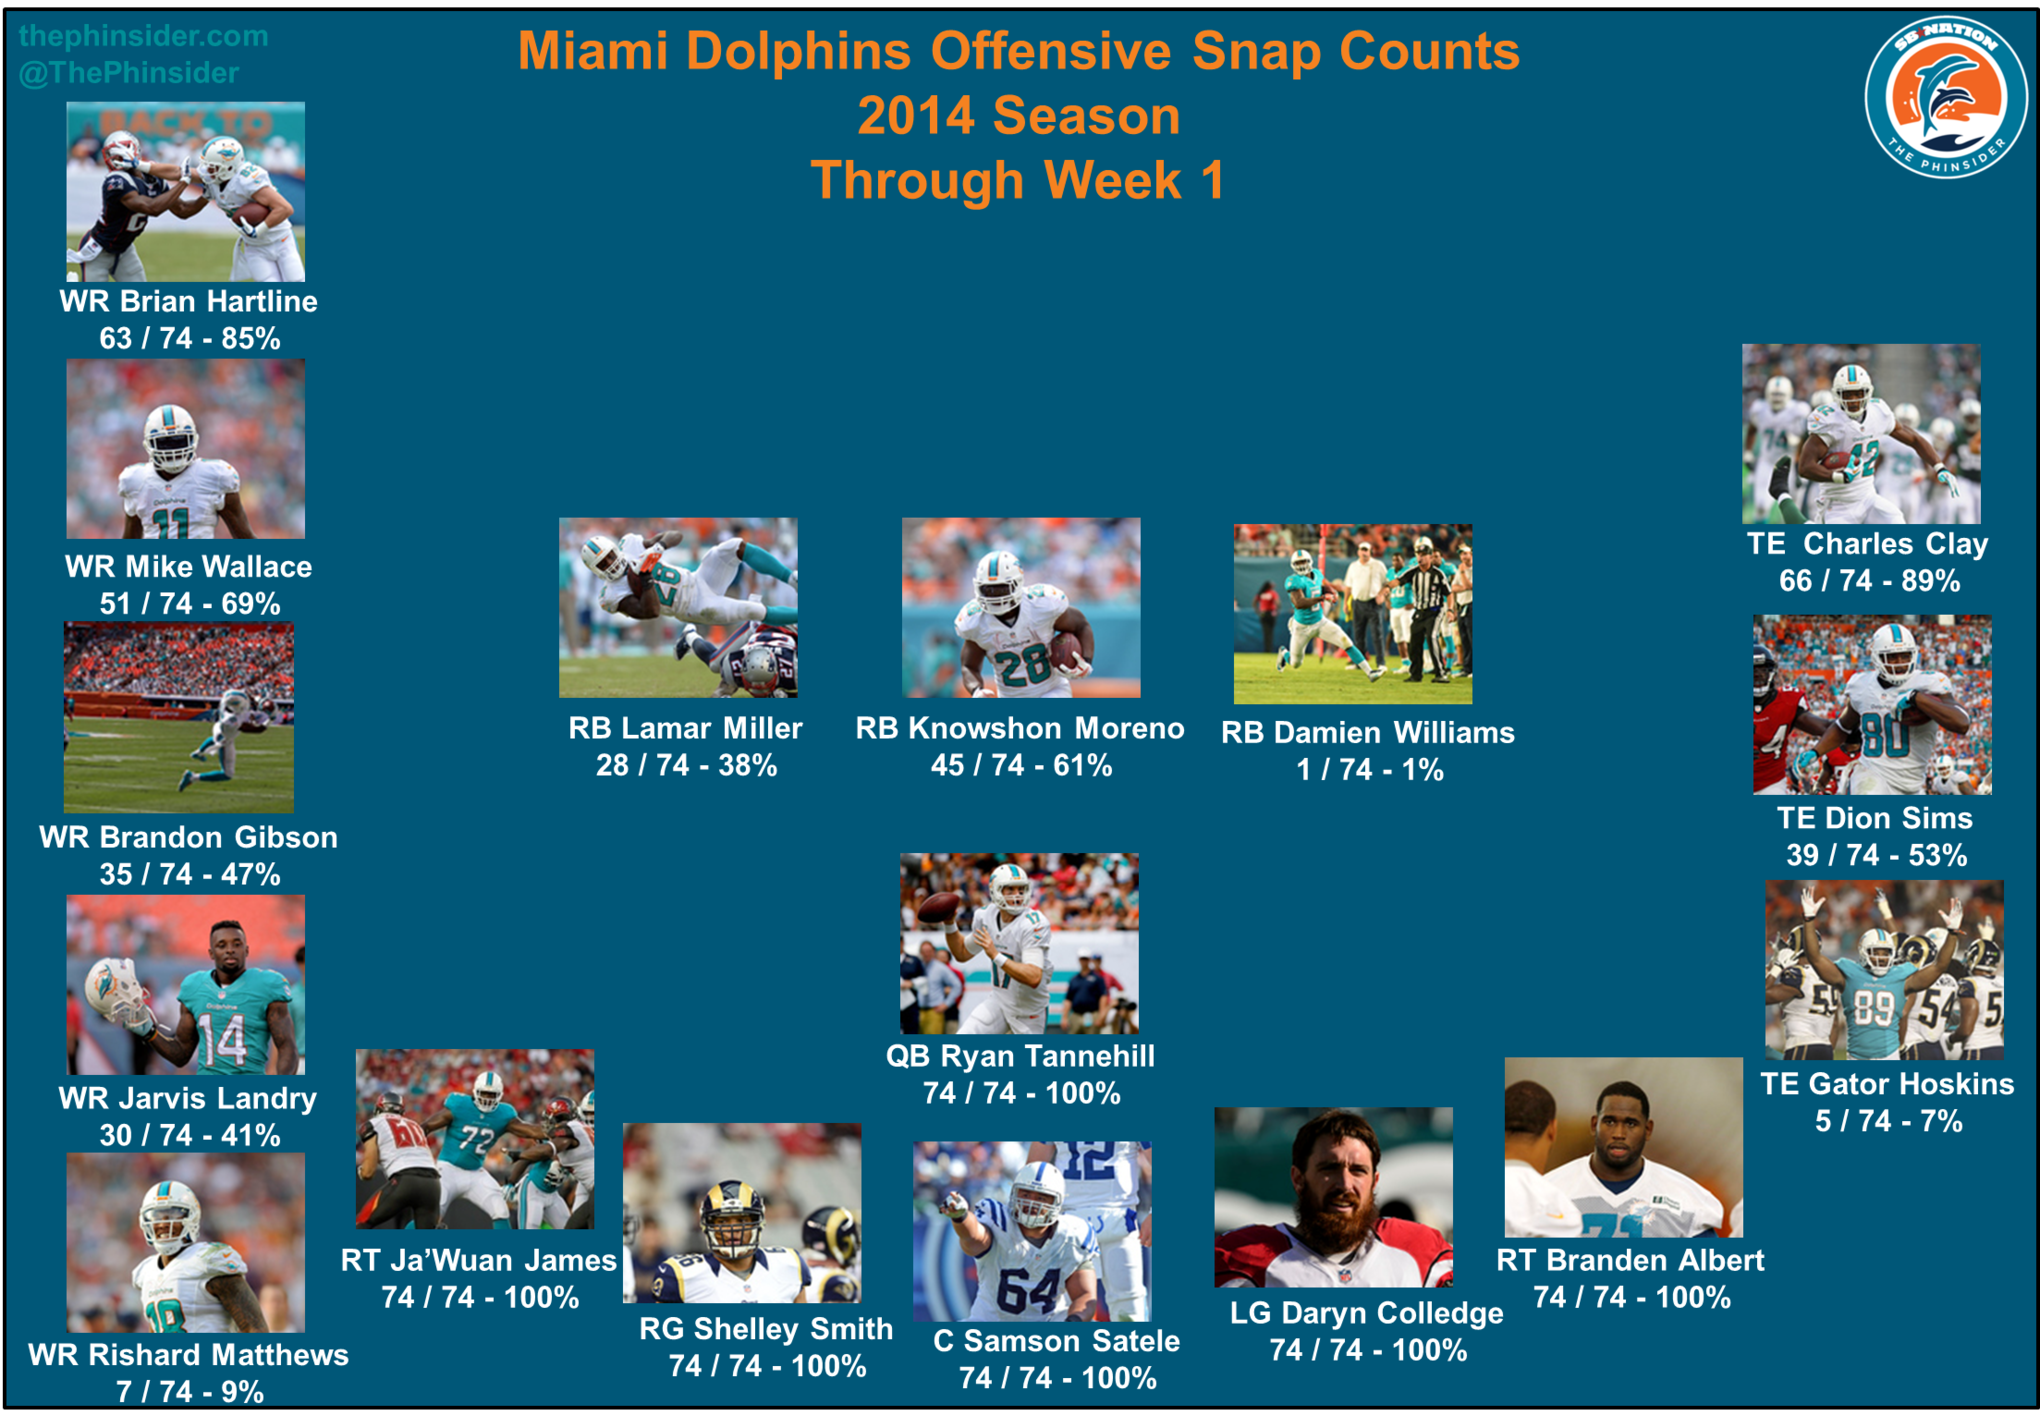 Dolphins_2014_snap_counts_-_offense_week_1a